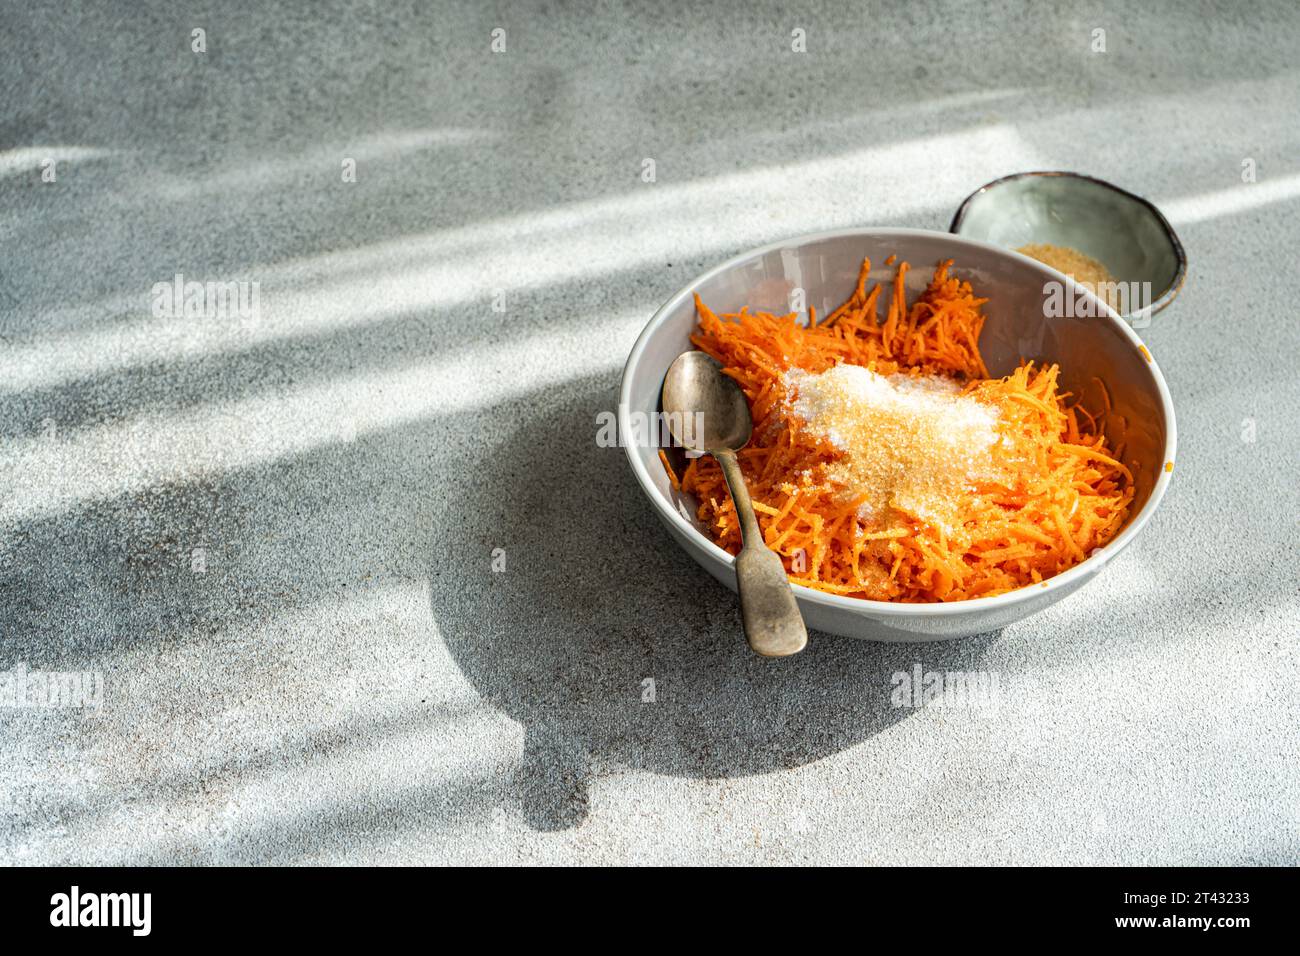 Overhead view of a dessert with grated Carrot and brown sugar Stock Photo